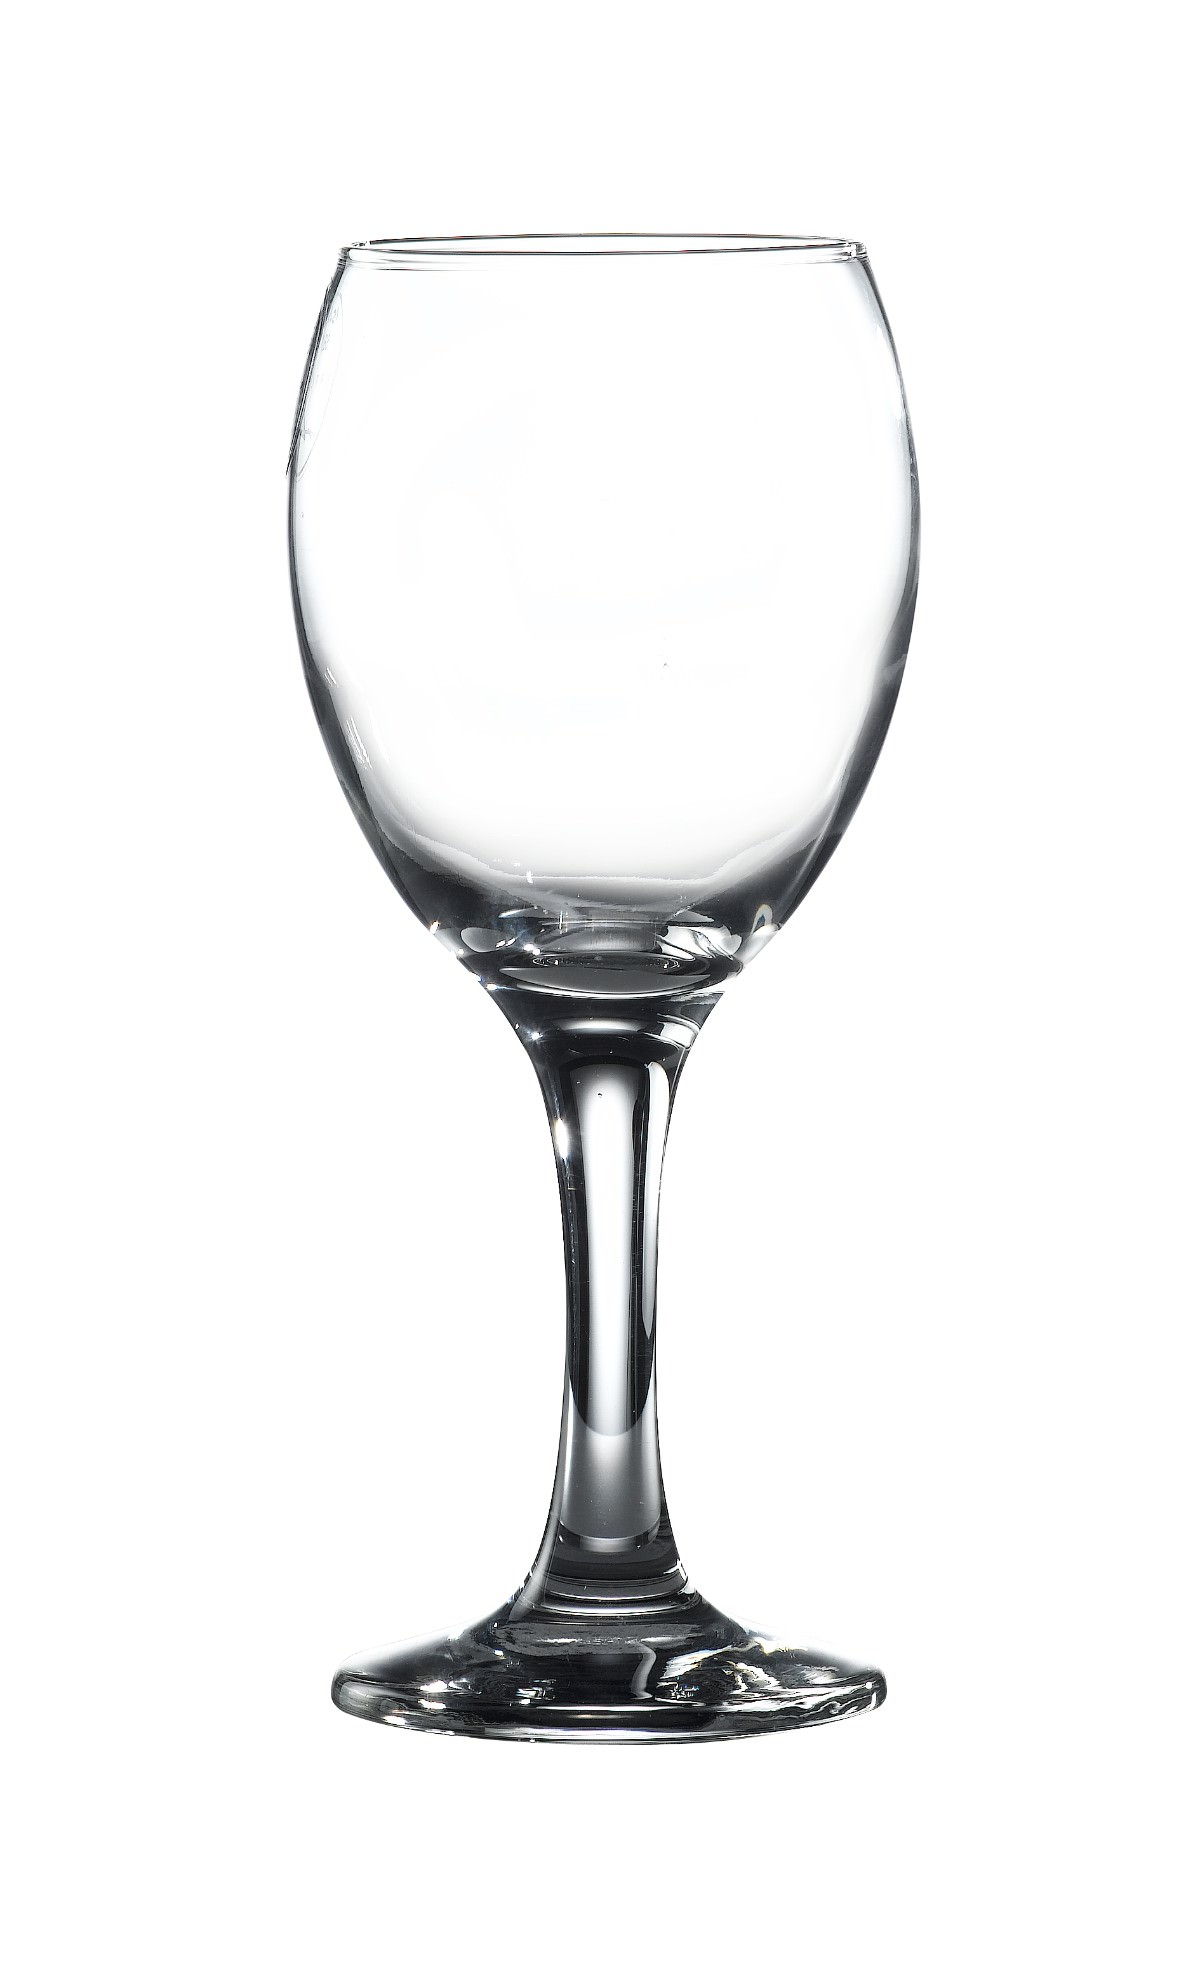 empire-wine-glass-24-5cl-8-5oz-catering-products-direct